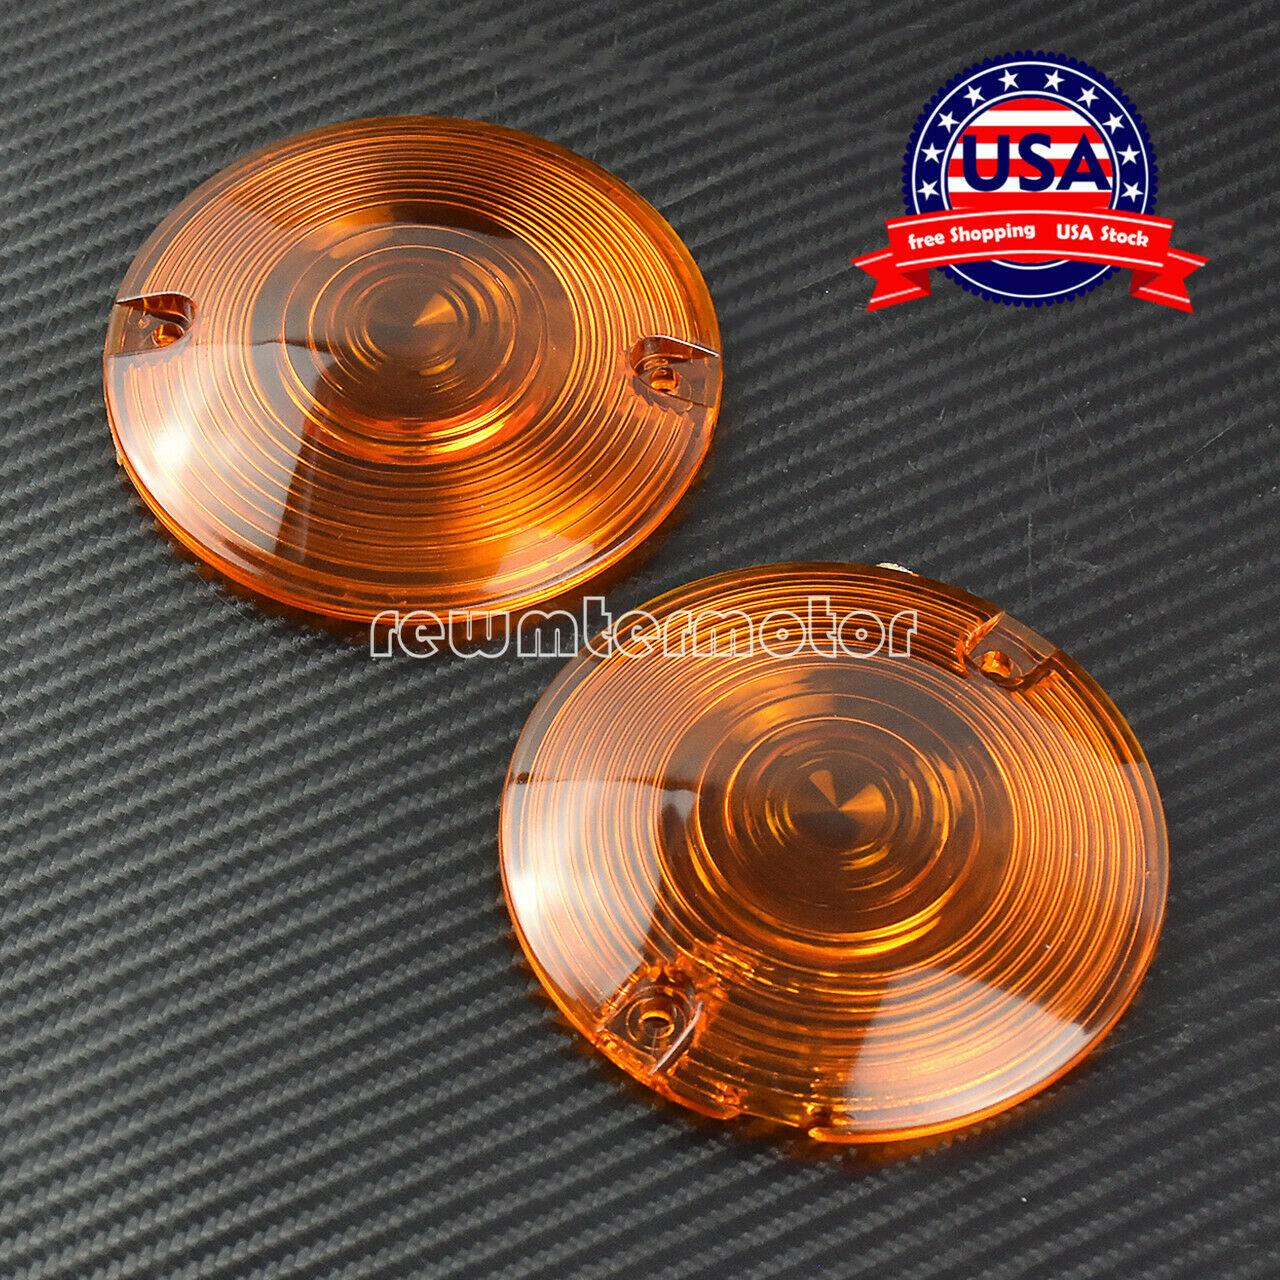 1 Pair Turn Signal Lens Amber Cover Fit For Harley Touring FLHT FLTR FLT Softail - Moto Life Products